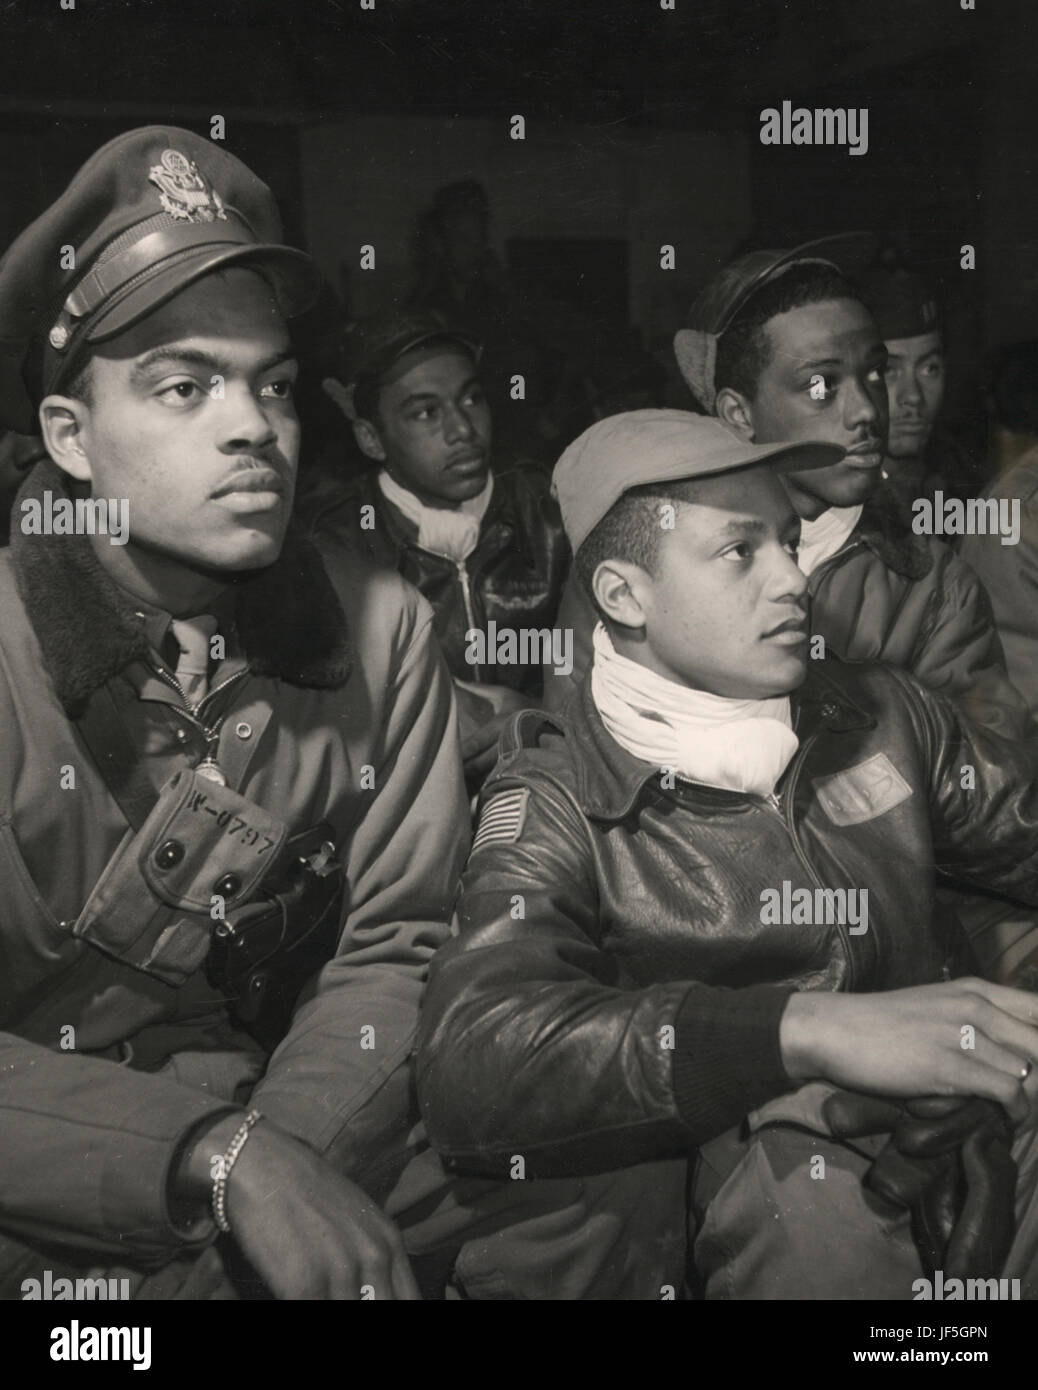 The Tuskegee Airmen is the popular name of a group of African-American military pilots who fought in World War II. Officially, they formed the 332nd Fighter Group and the 477th Bombardment Group of the United States Army Air Forces. All black military pilots who trained in the United States trained at Moton Field, the Tuskegee Army Air Field, and were educated at Tuskegee University, located near Tuskegee, Alabama. Stock Photo